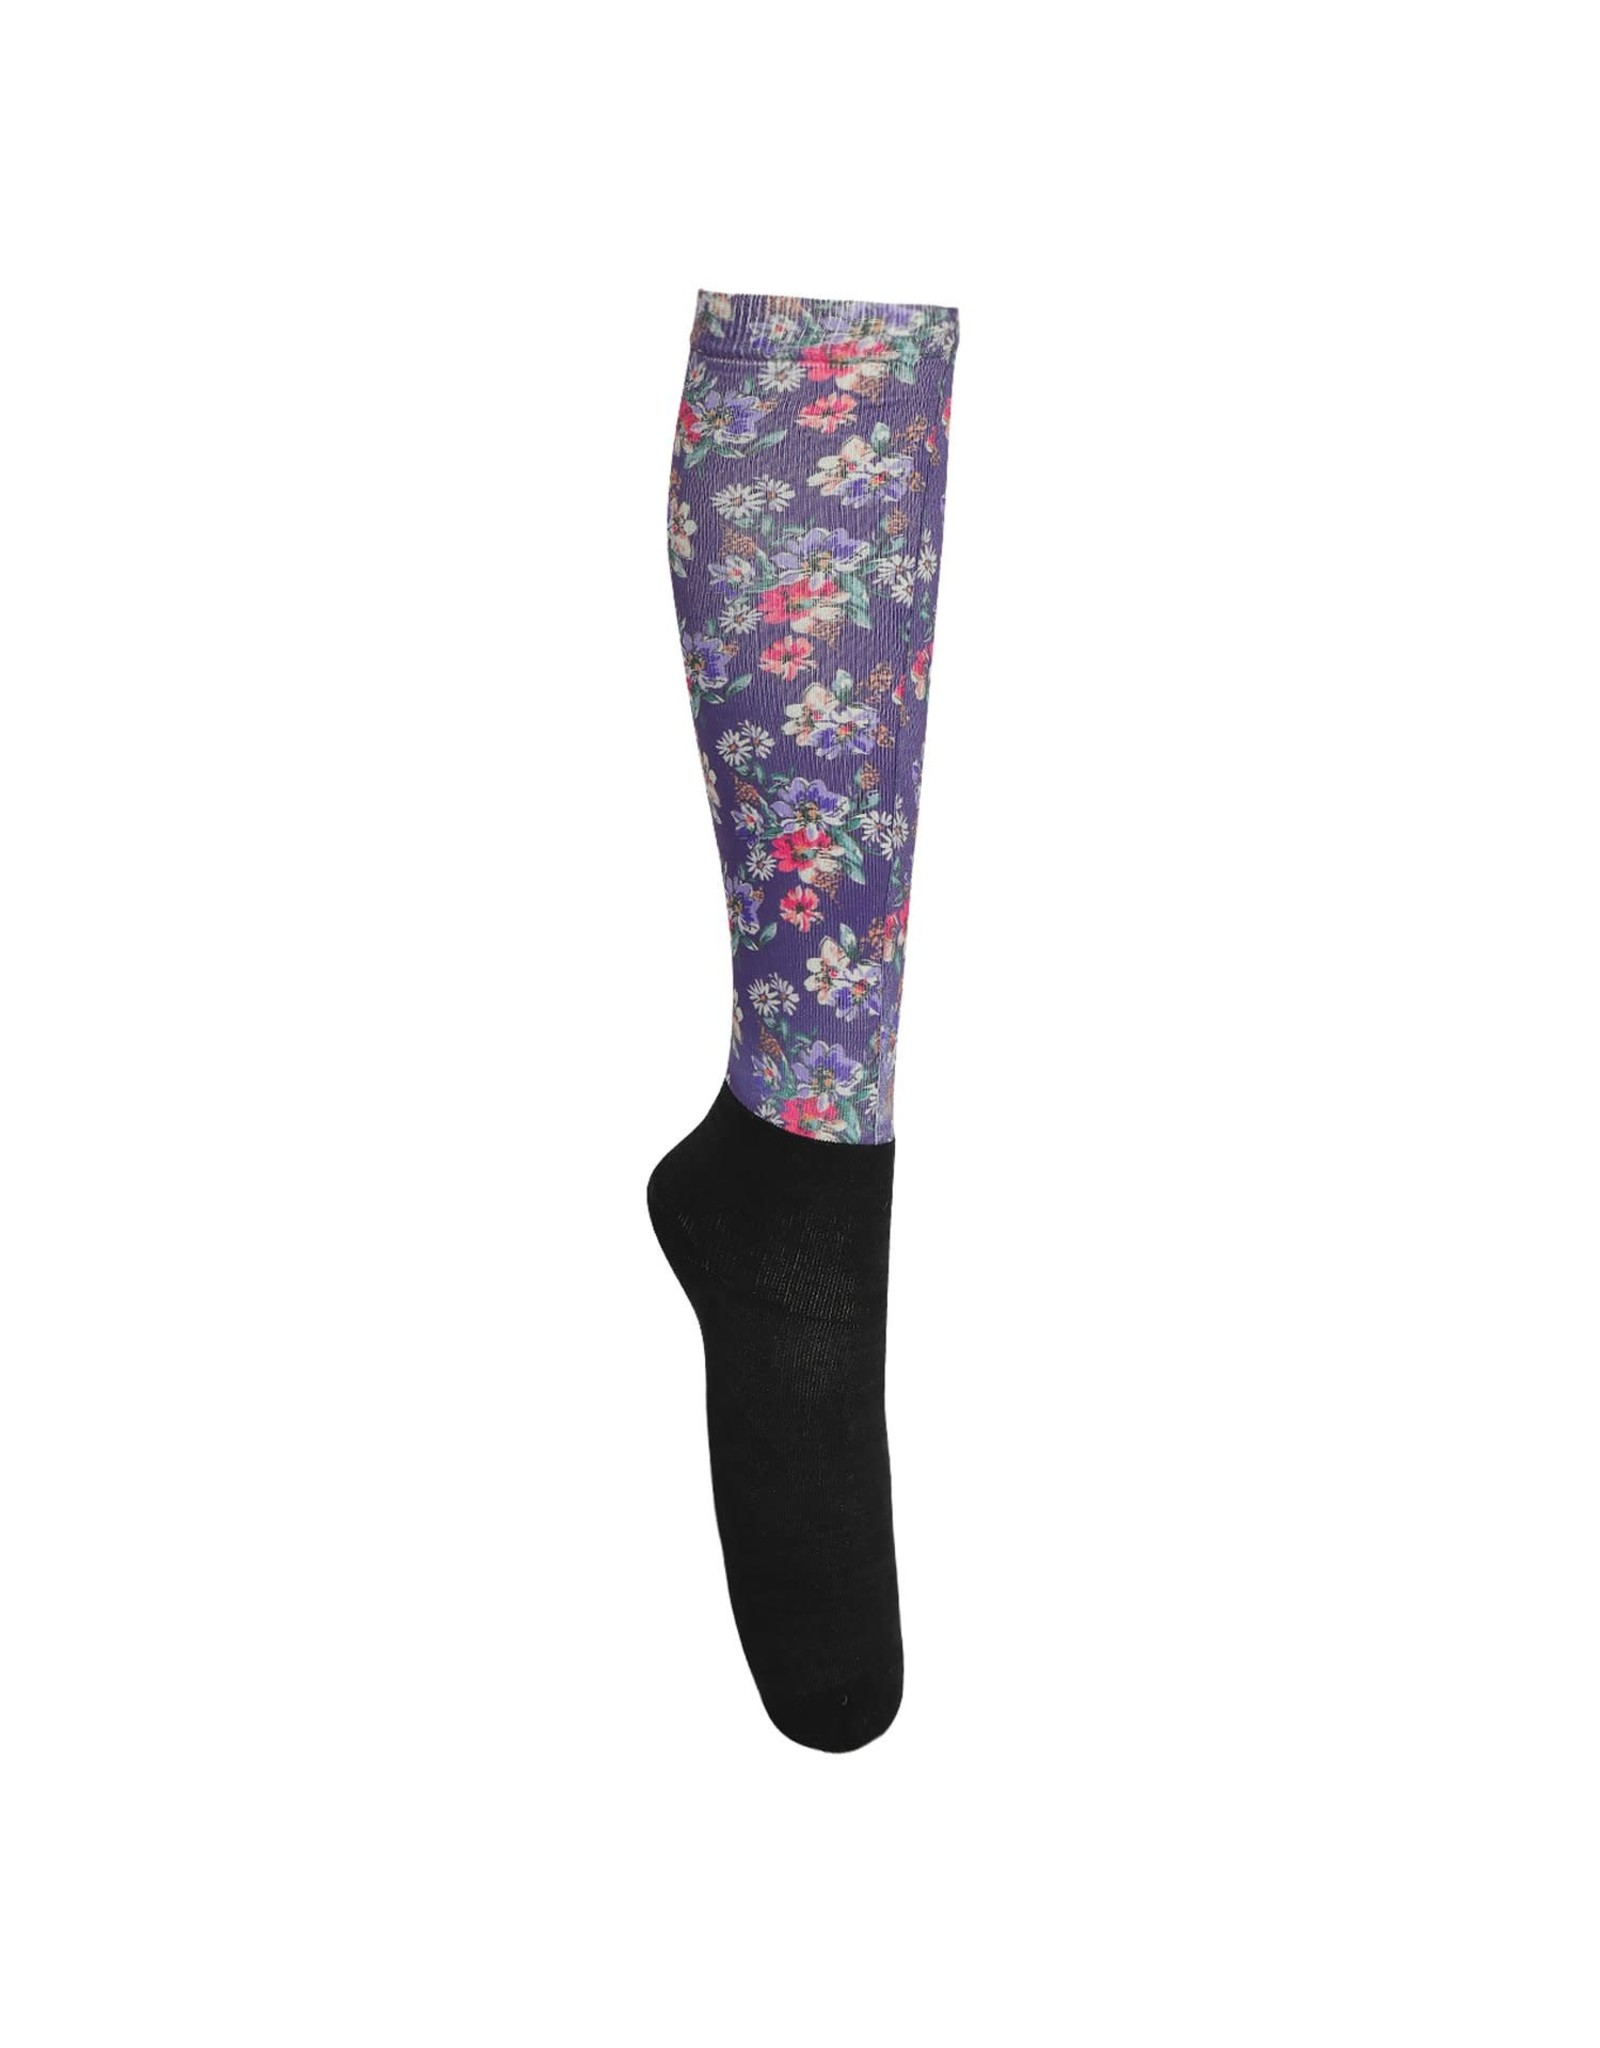 Equine Couture OTC Boot Sock